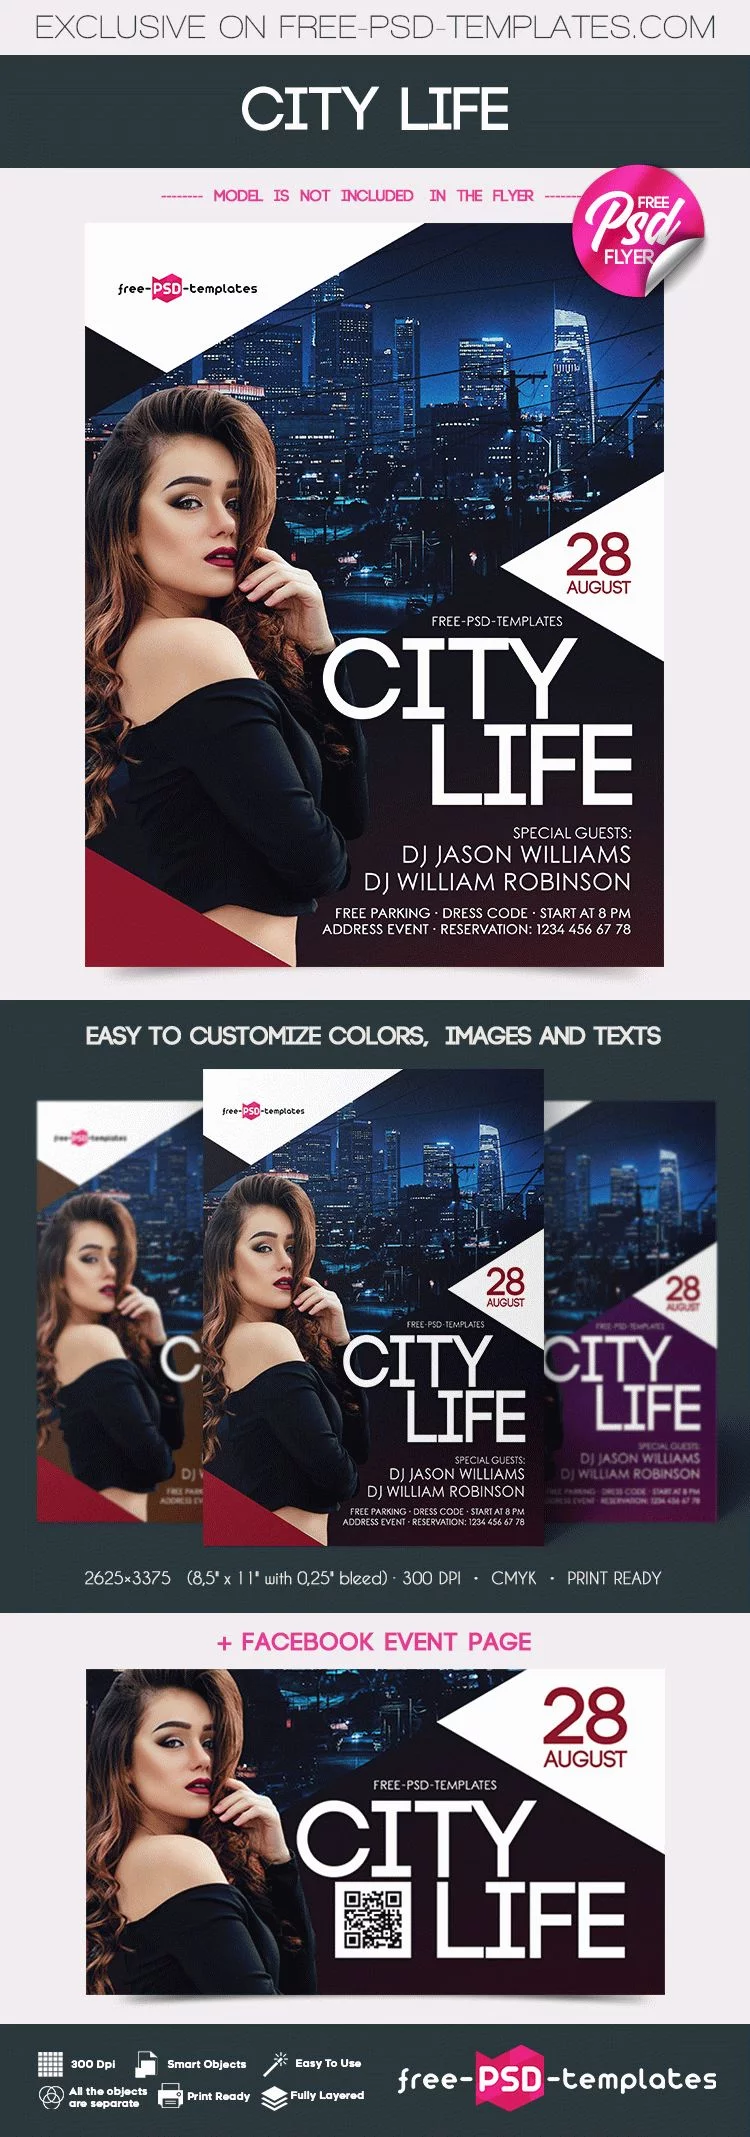 Free City Life Flyer in PSD